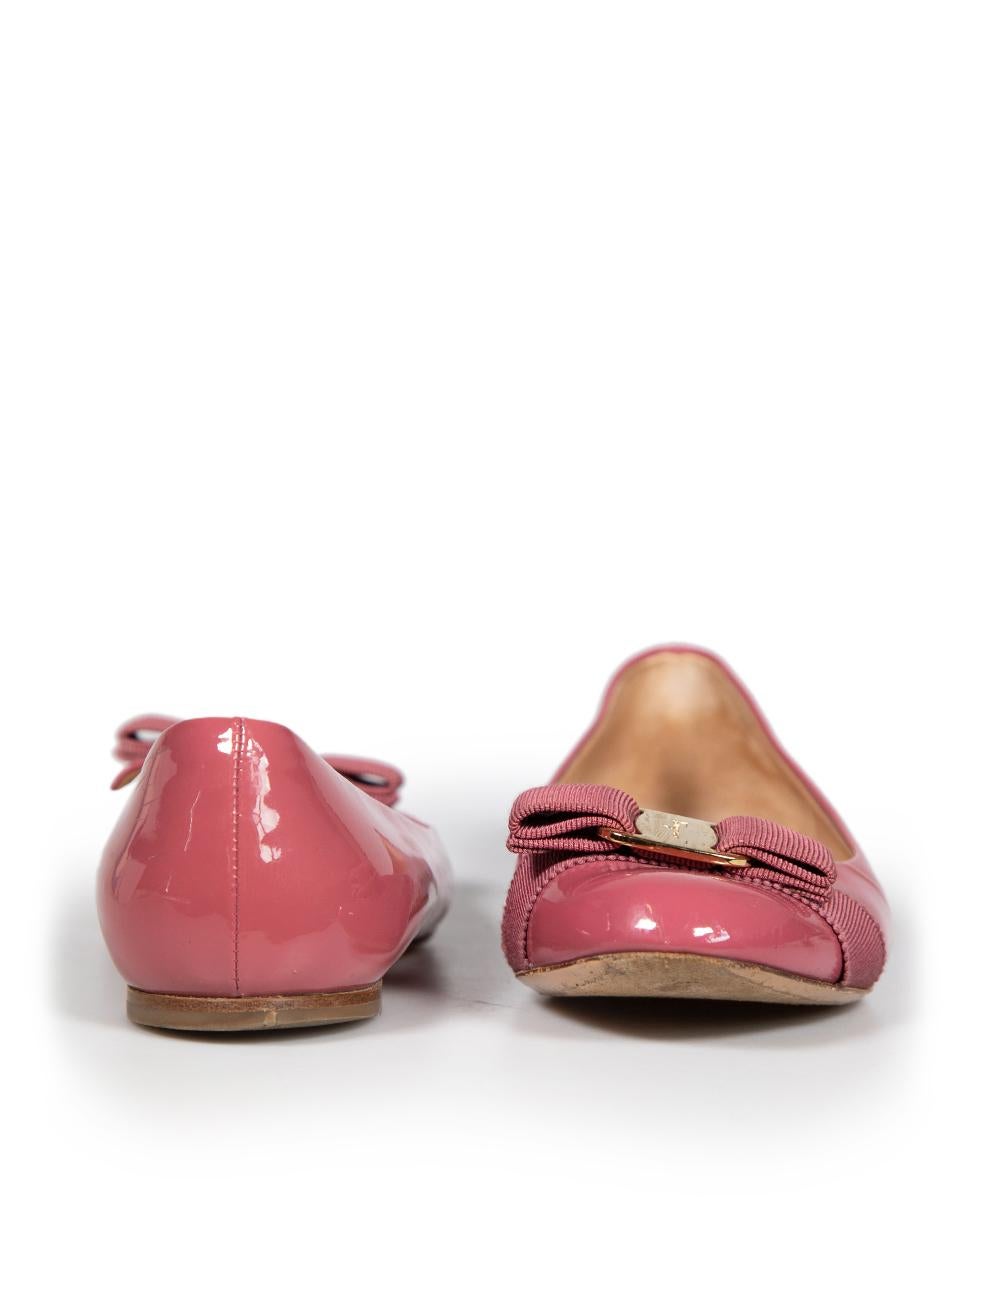 Salvatore Ferragamo Pink Patent Vara Ballet Flats Size US 7 In Excellent Condition For Sale In London, GB